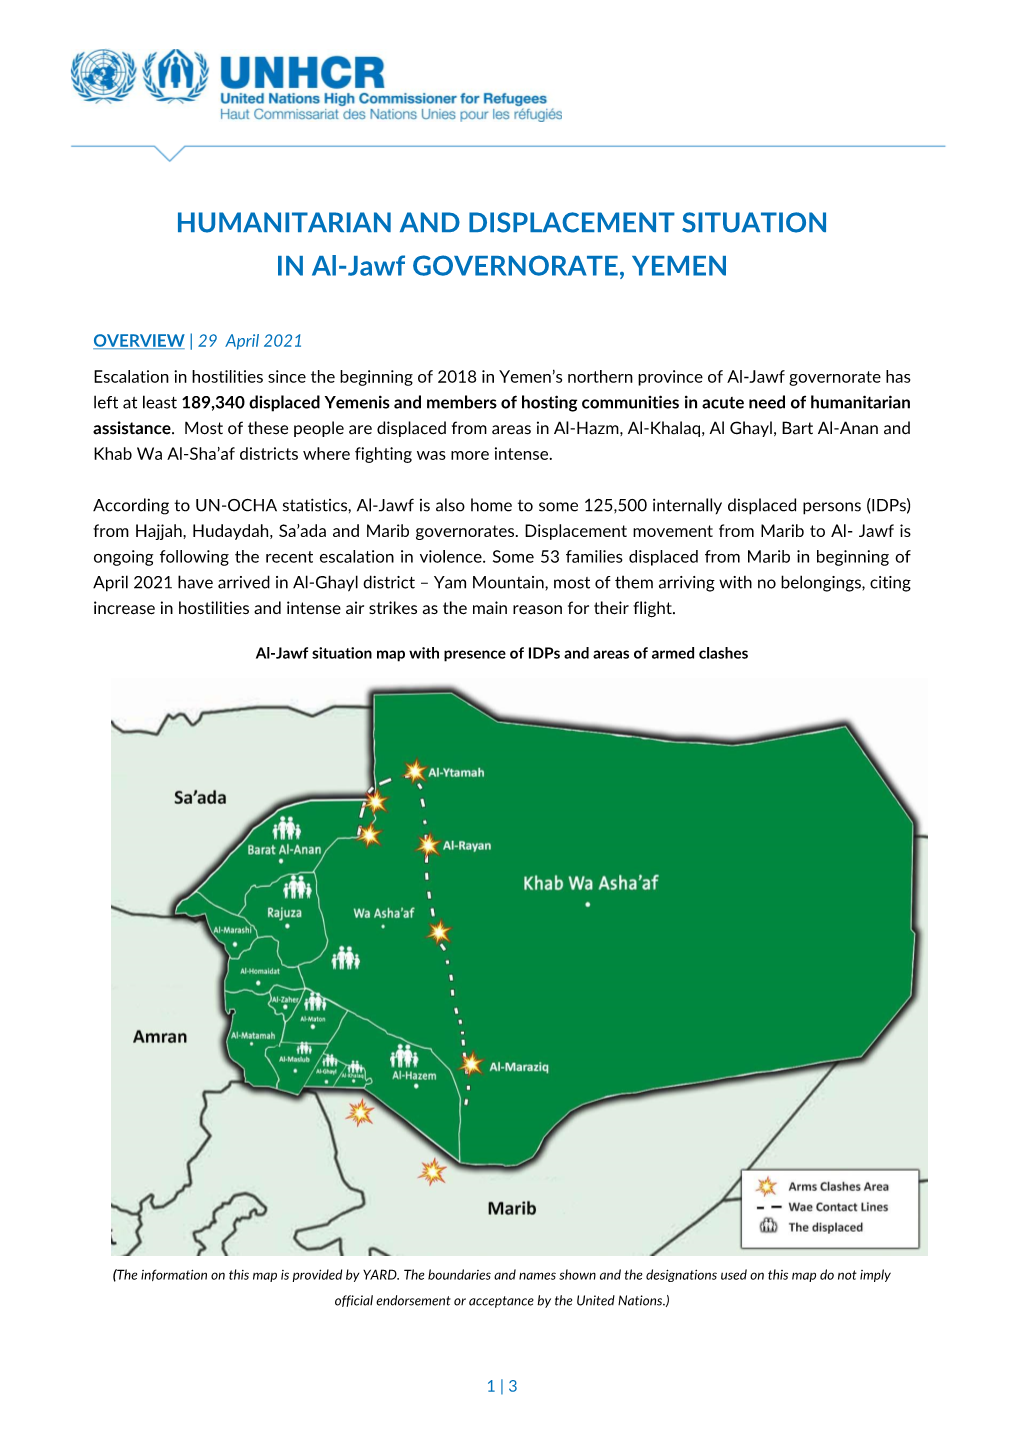 HUMANITARIAN and DISPLACEMENT SITUATION in Al-Jawf GOVERNORATE, YEMEN